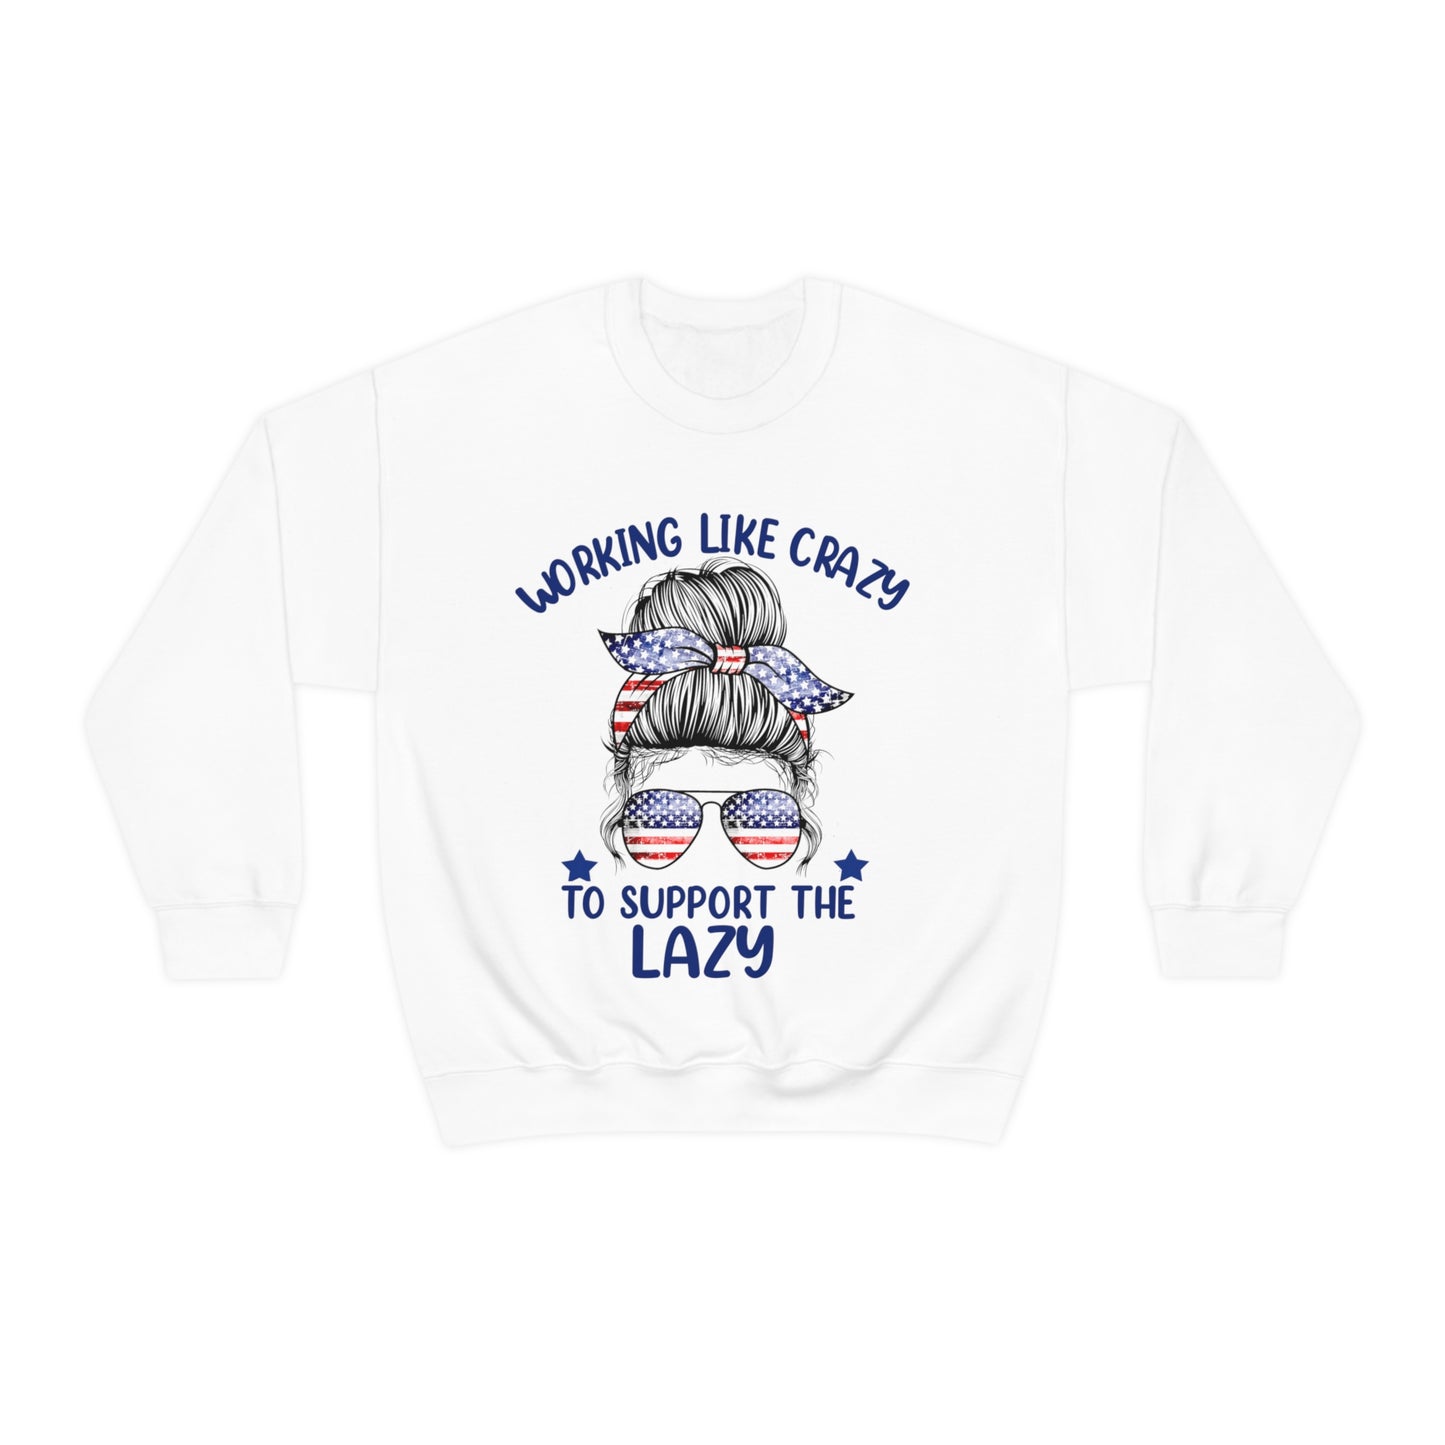 Work Like Crazy To Support The Lazy Crewneck Sweatshirt